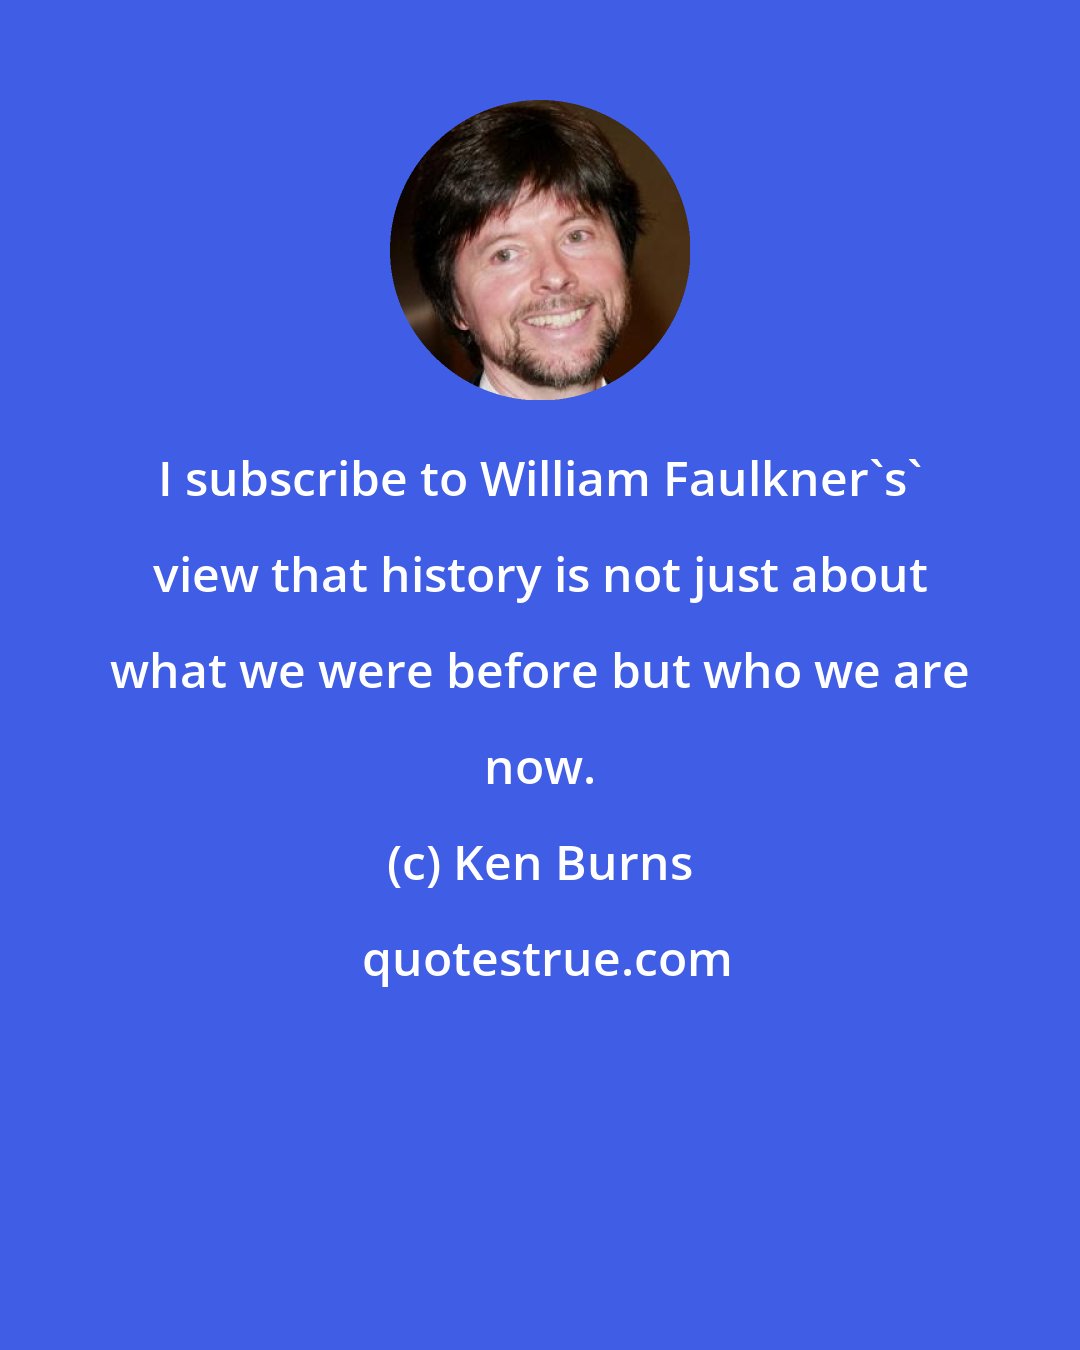 Ken Burns: I subscribe to William Faulkner's' view that history is not just about what we were before but who we are now.